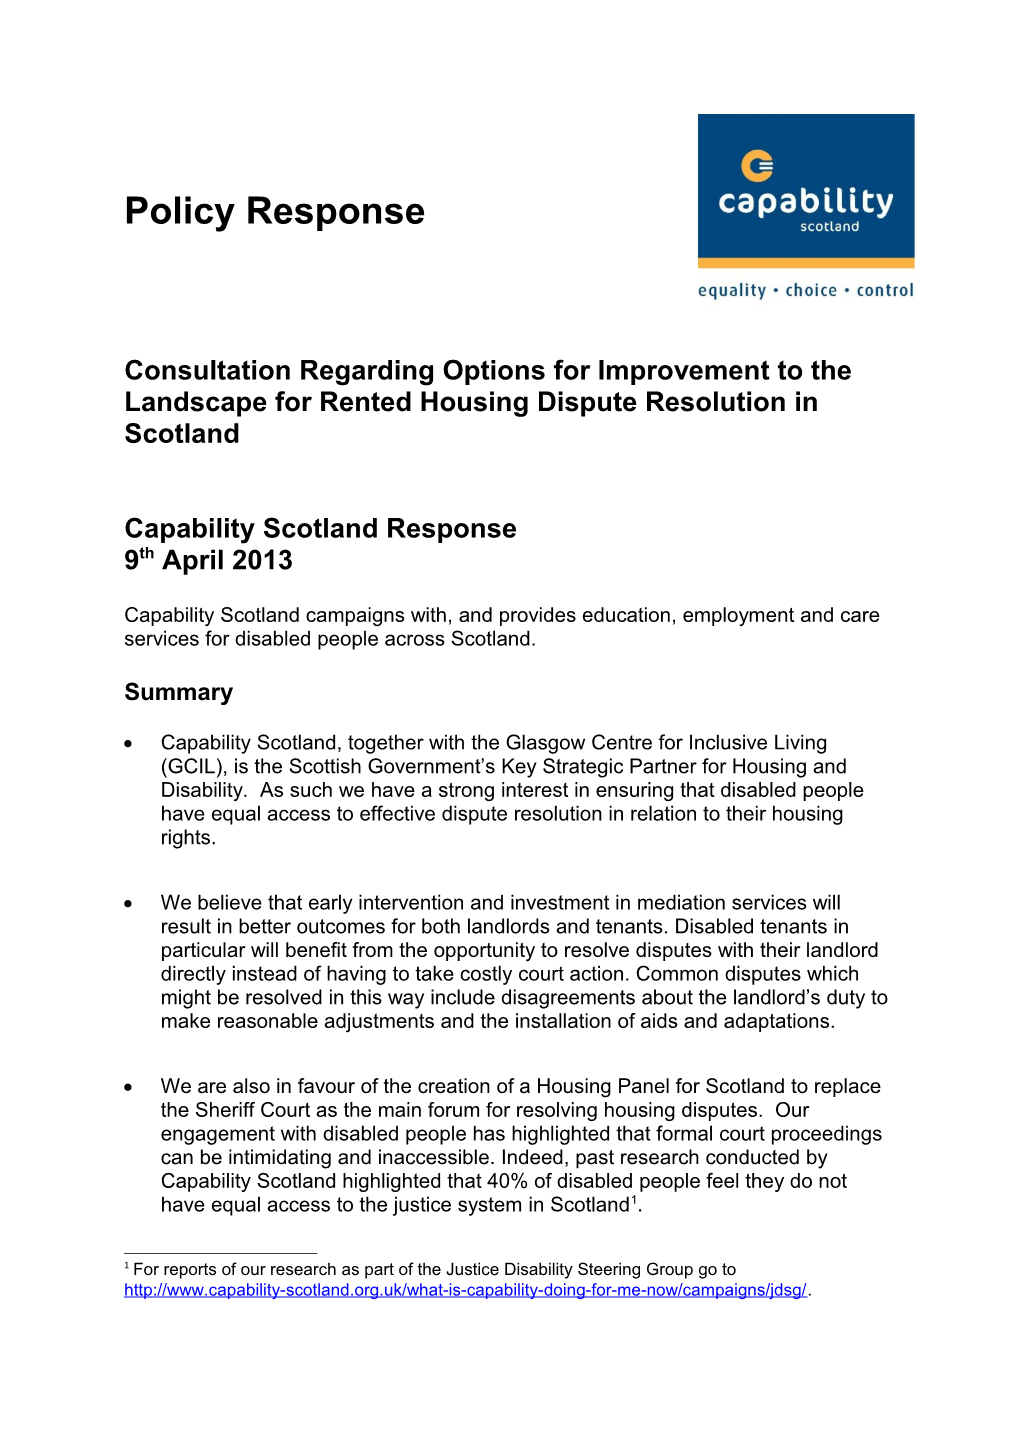 Consultation Regarding Options for Improvement to the Landscape for Rented Housing Dispute